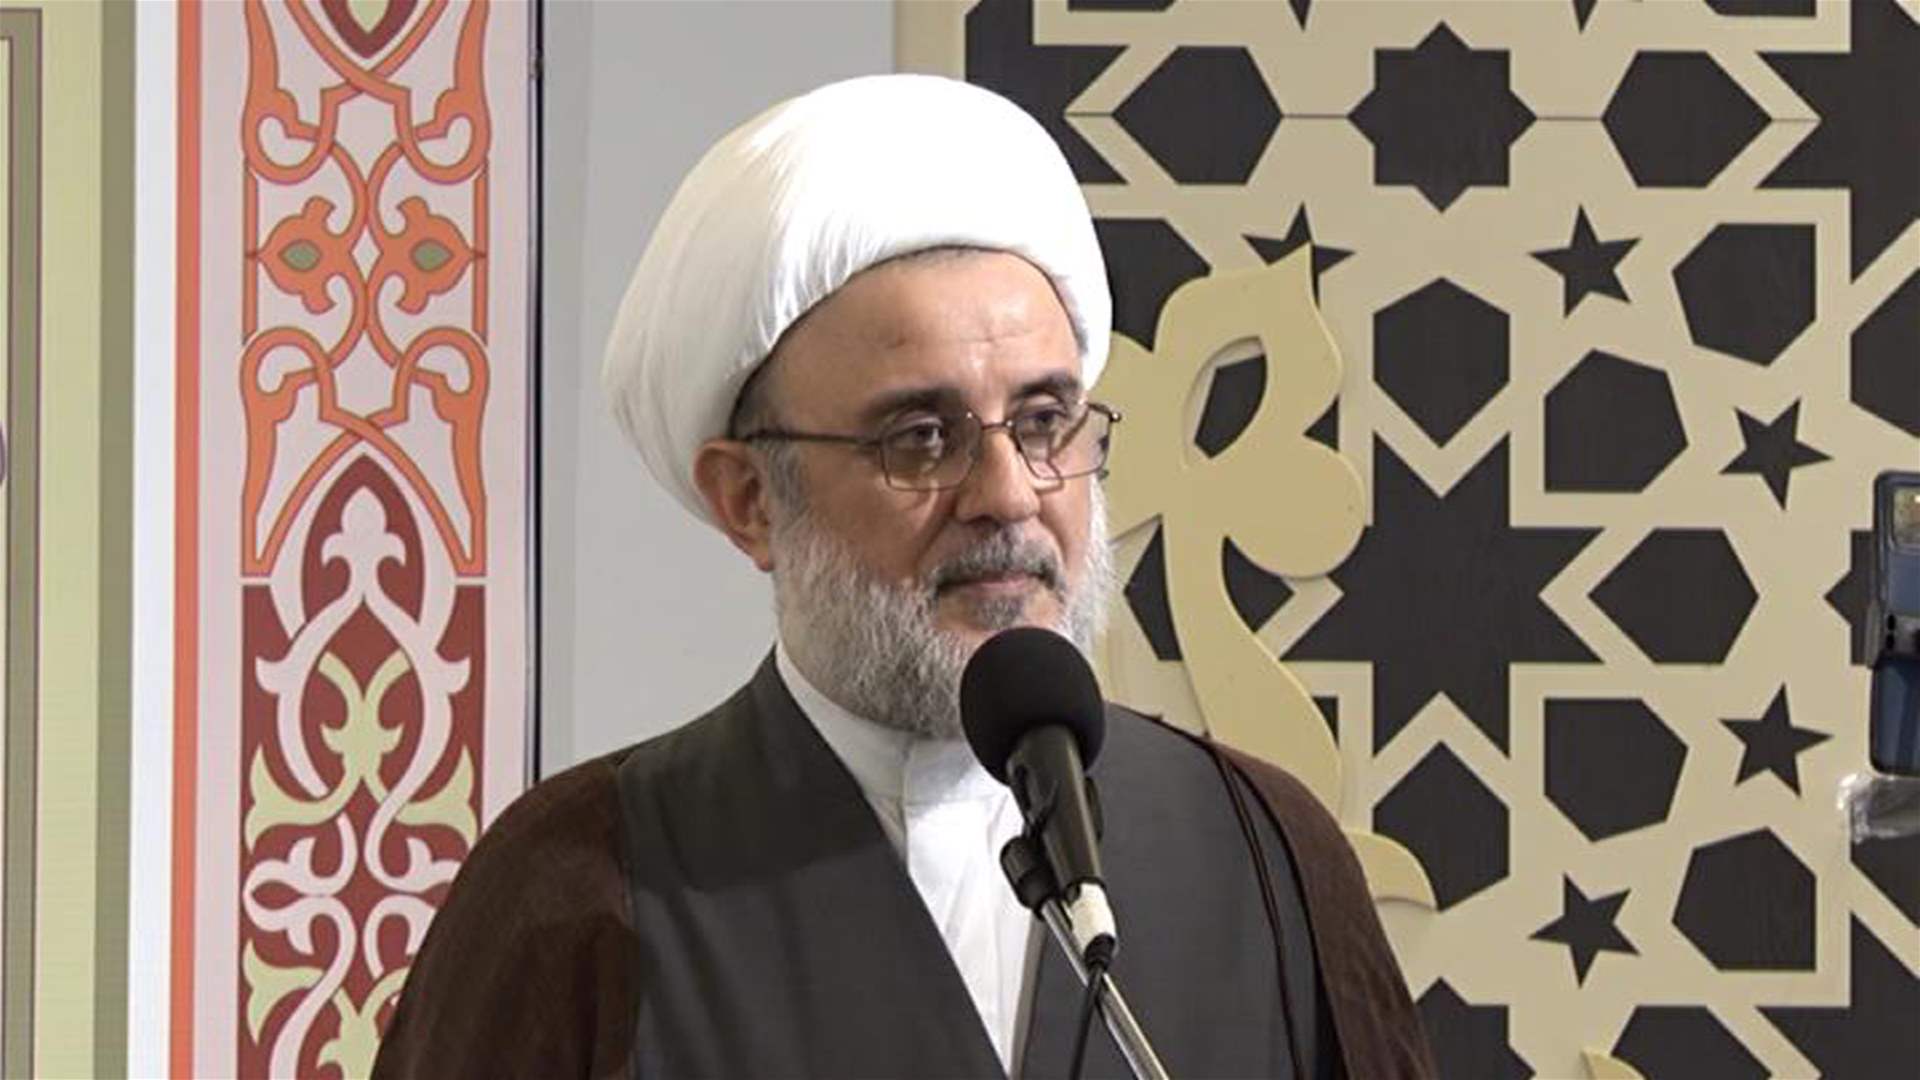 Hezbollah&#39;s Sheikh Kaouk: National crisis deepening, dialogue with FPM unshaken amid unrest